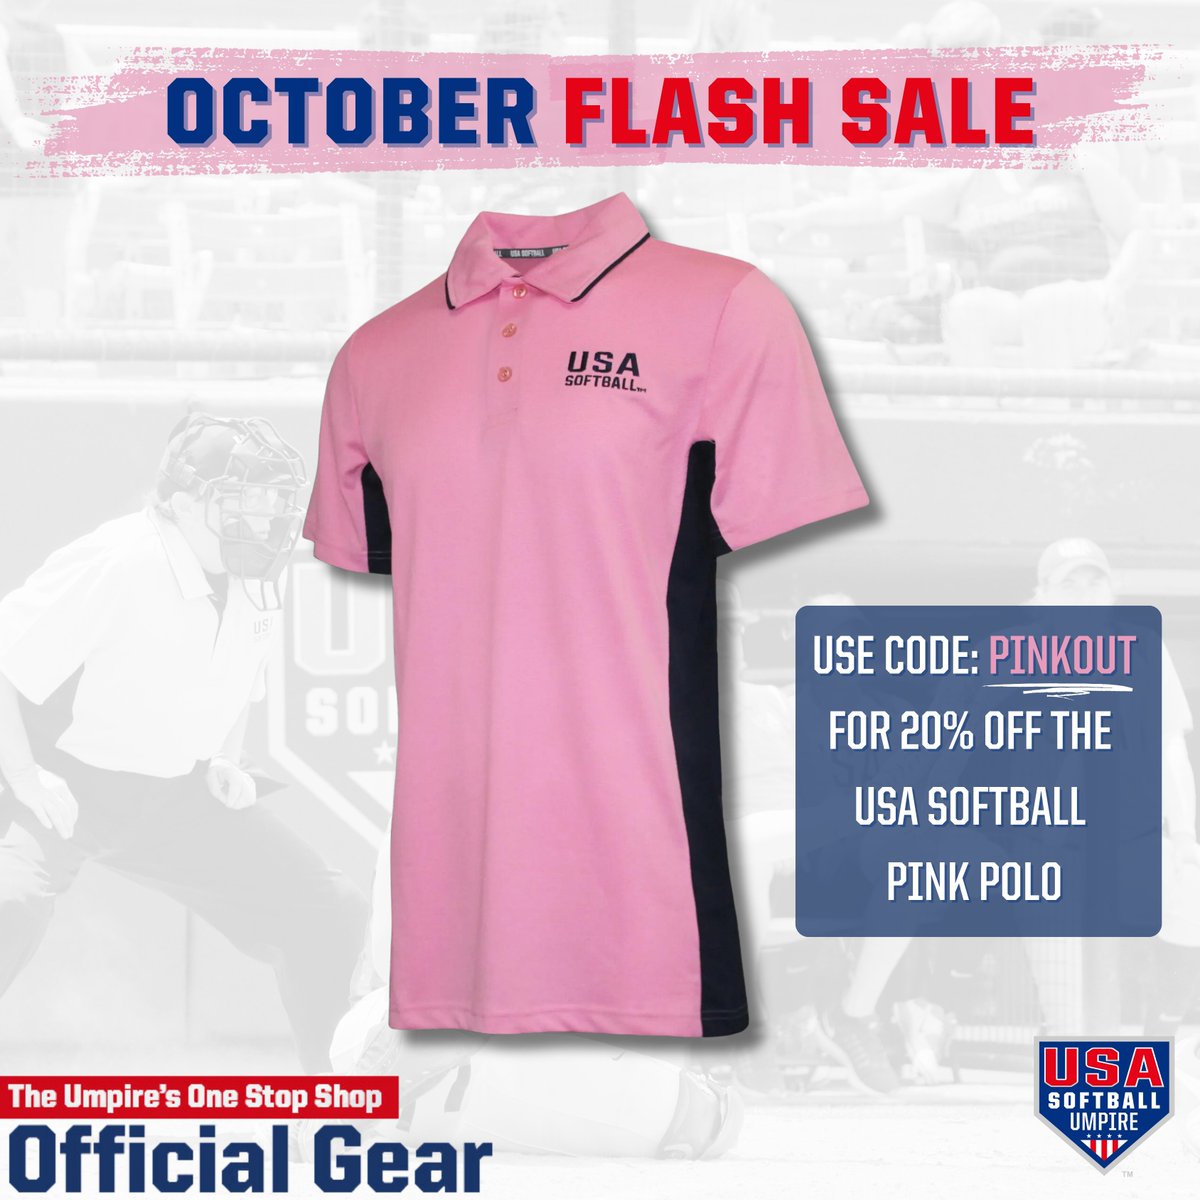 Join USA Softball #BluesAcrossAmerica 🇺🇸 by 𝙬𝙚𝙖𝙧𝙞𝙣𝙜 𝙥𝙞𝙣𝙠 to spread #BreastCancerAwareness through the month of October 💗

Use code 'PINKOUT' for 20% off — Sale ends 10/10❕

🔗 go.usasoftball.com/3tgPf3T